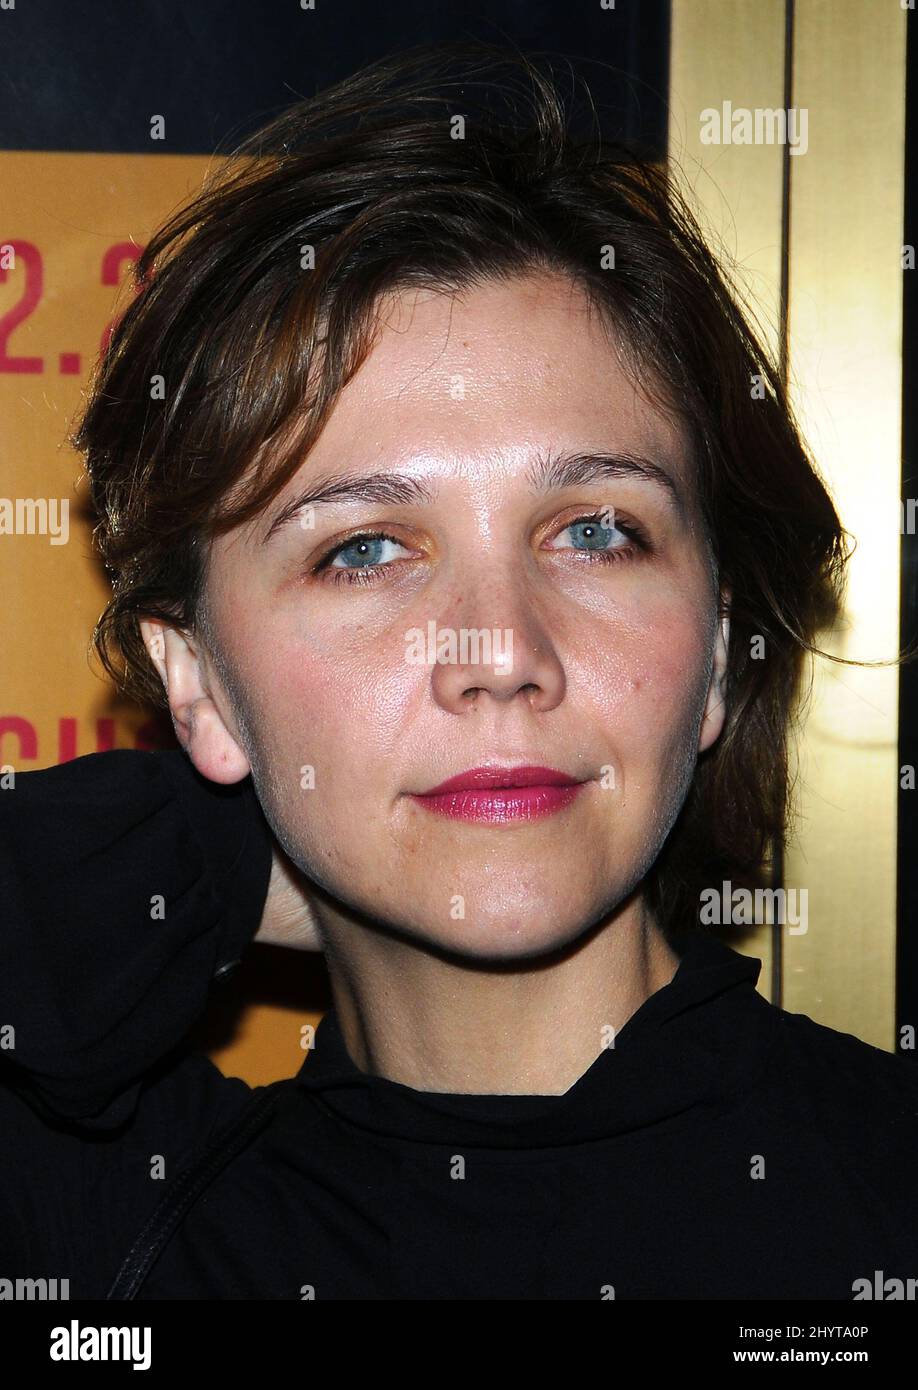 Maggie Gyllenhaal attending the opening of the The Seagull Play, New York. Stock Photo